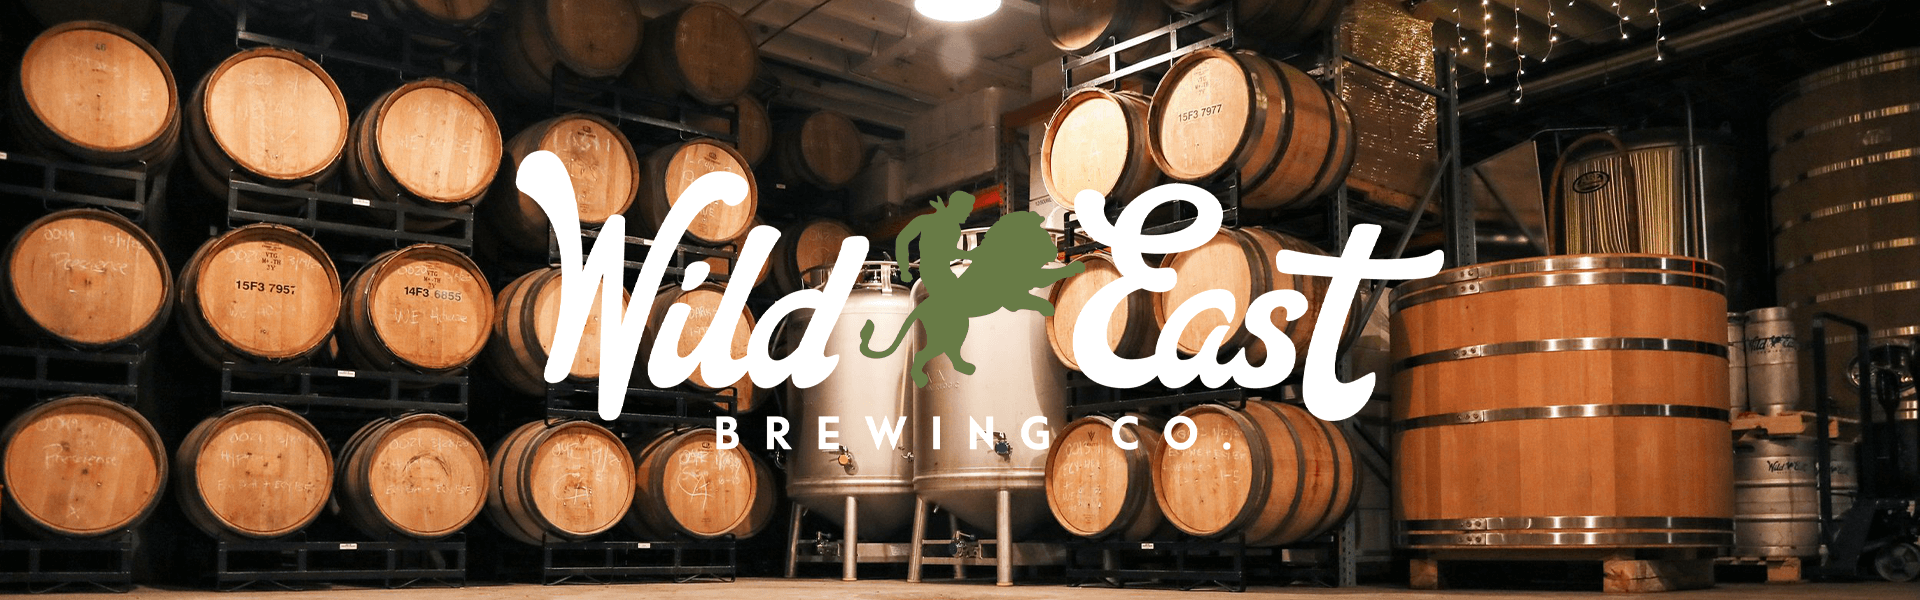 Wild East Brewing Co